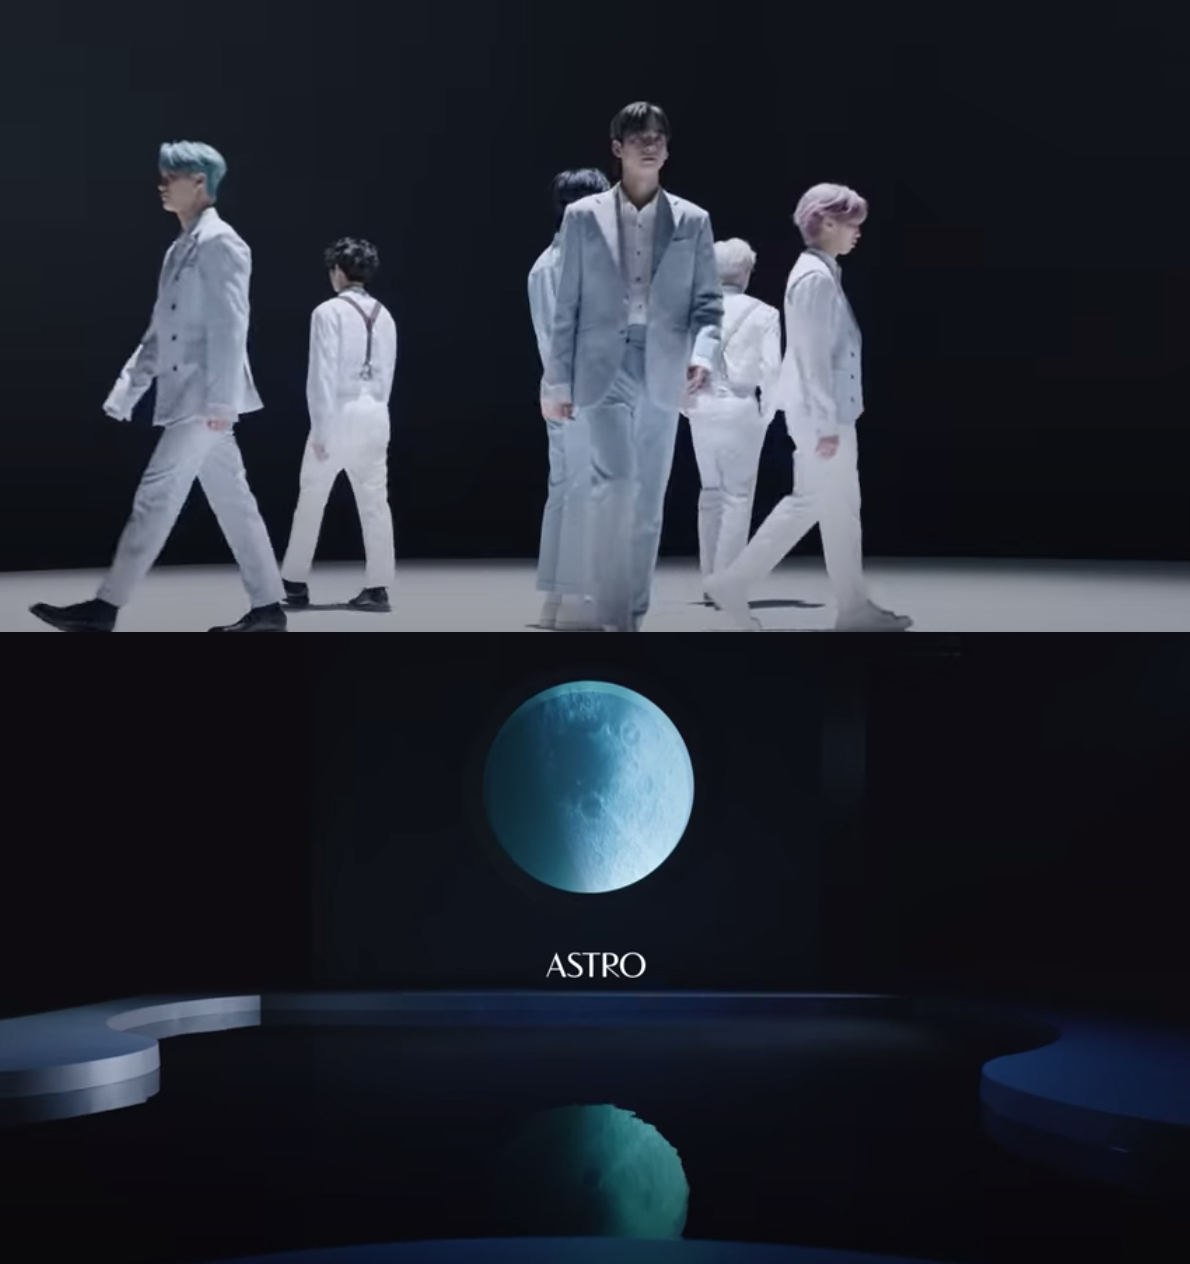 WATCH: ASTRO Are Dreamy Time Travelers in "GATEWAY" Concept Trailer